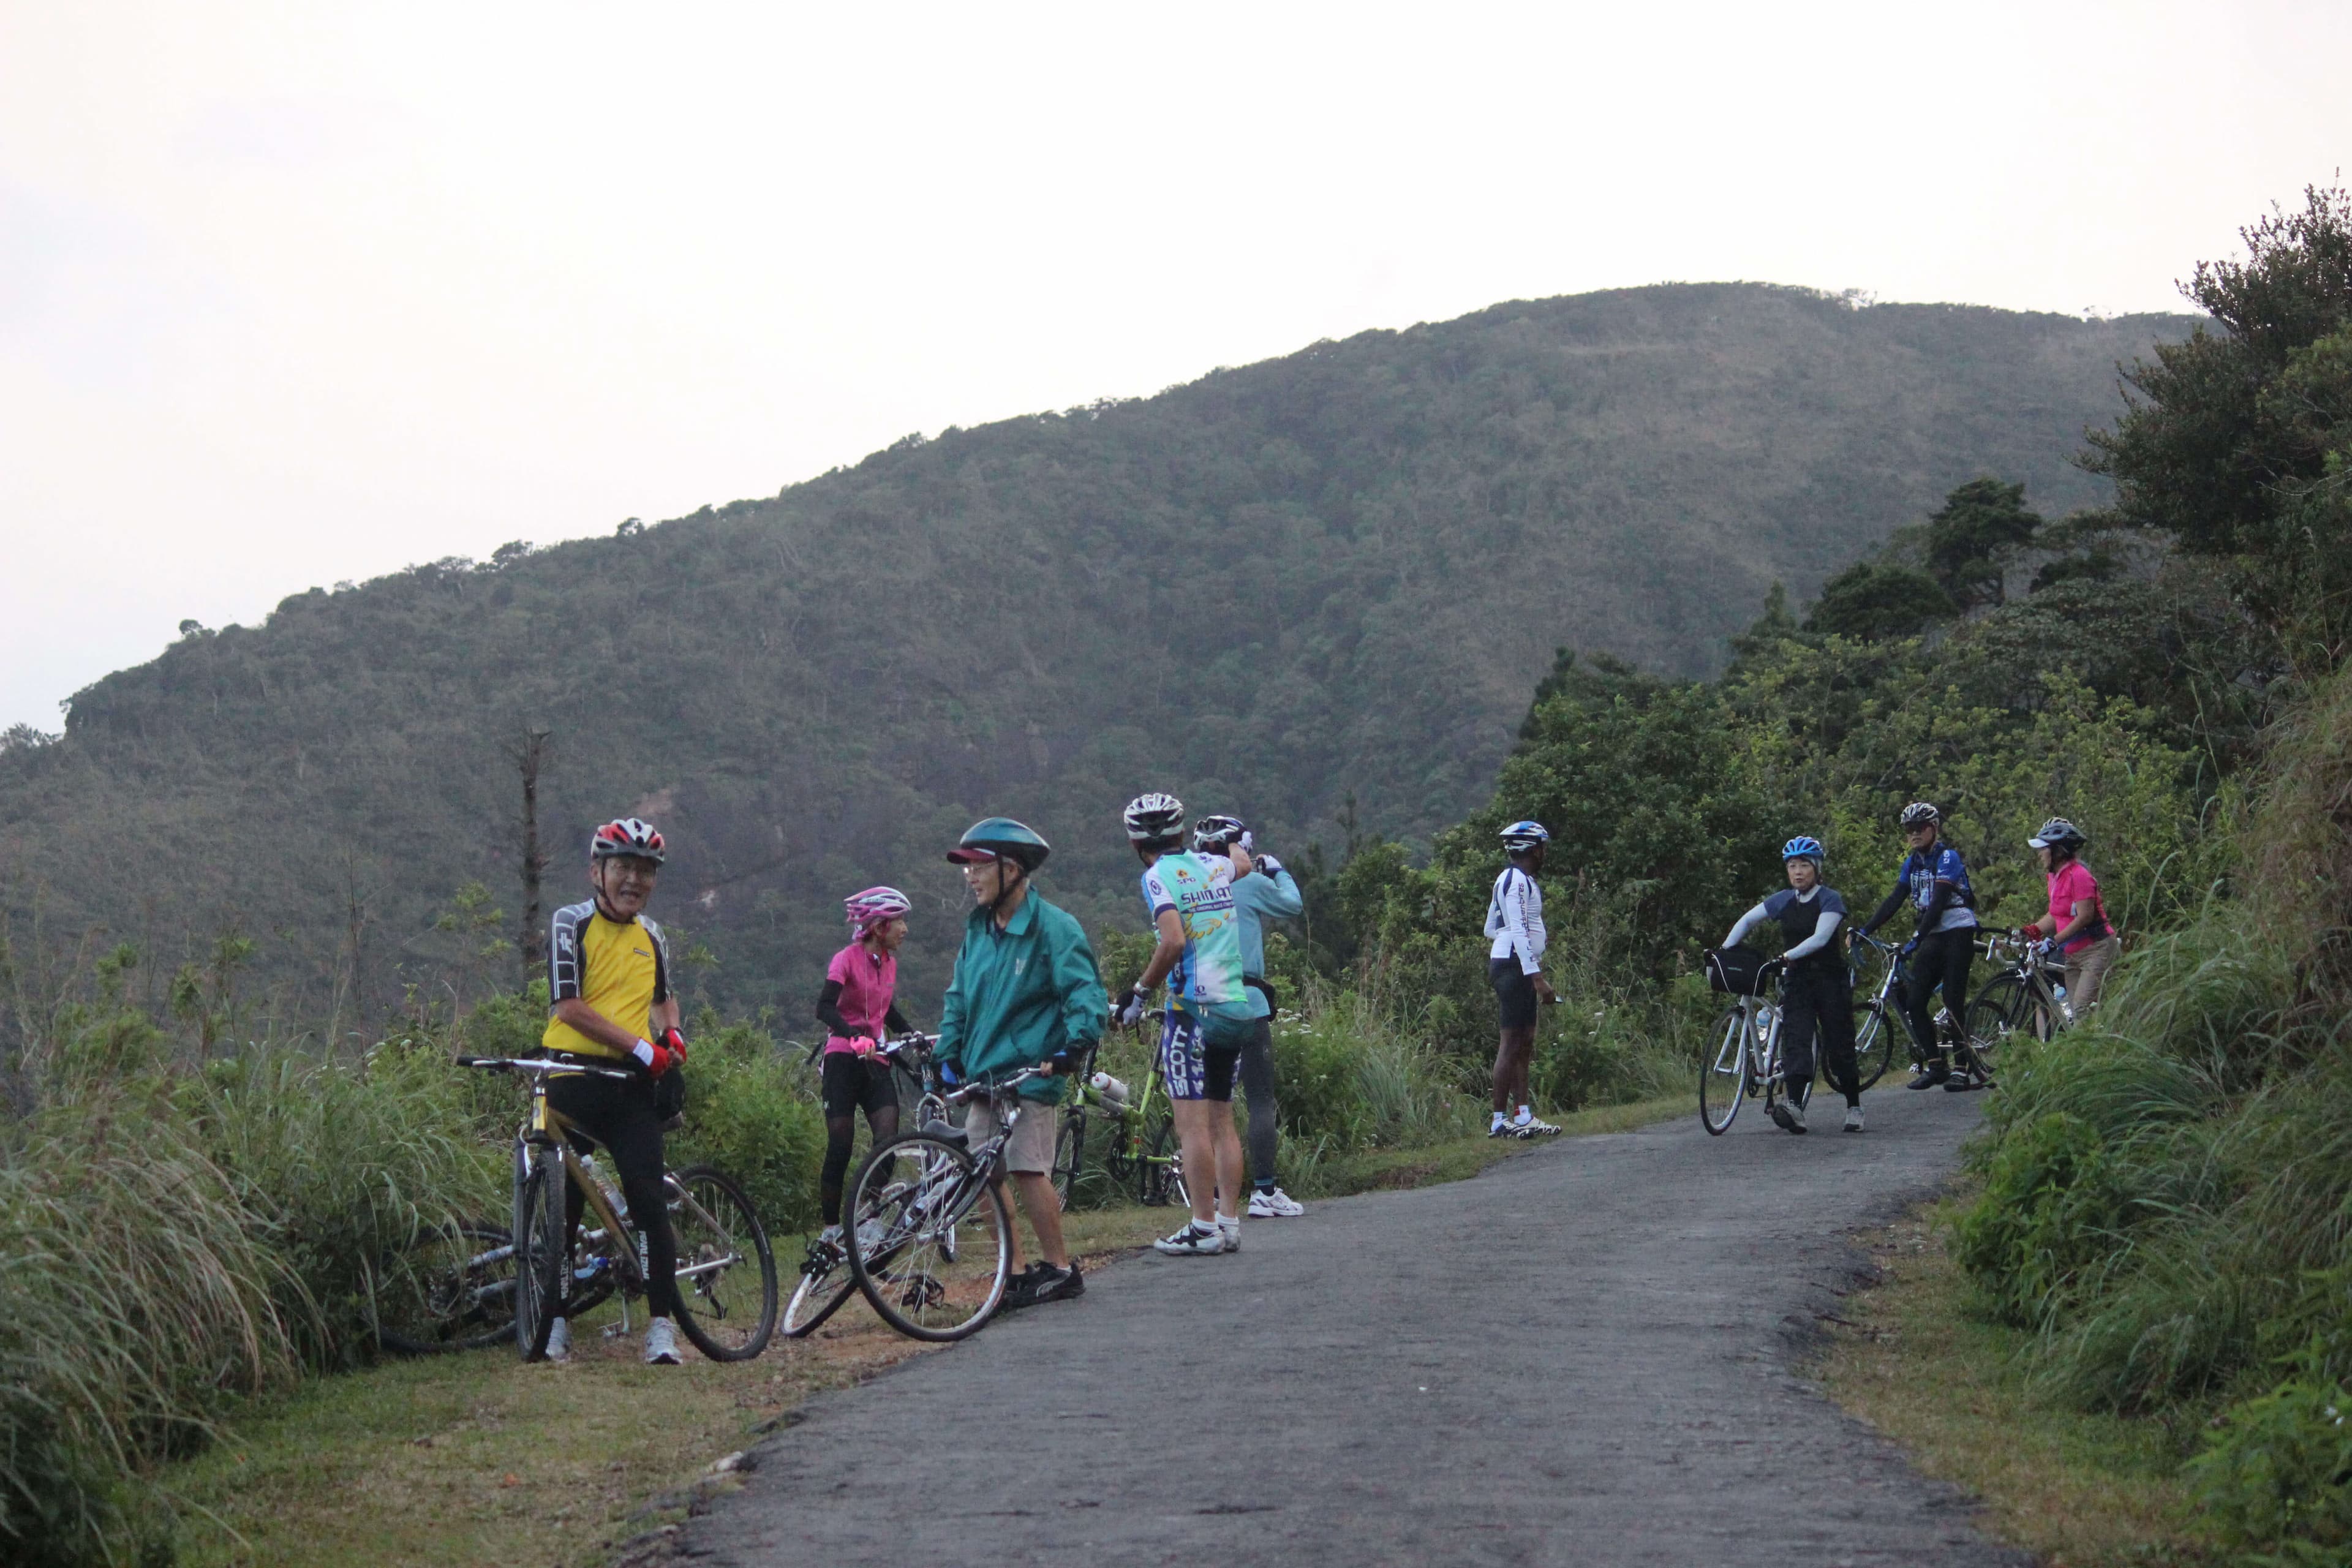 The cyclists take a break and watching beauty of the nature in Meemure route Sri Lanka